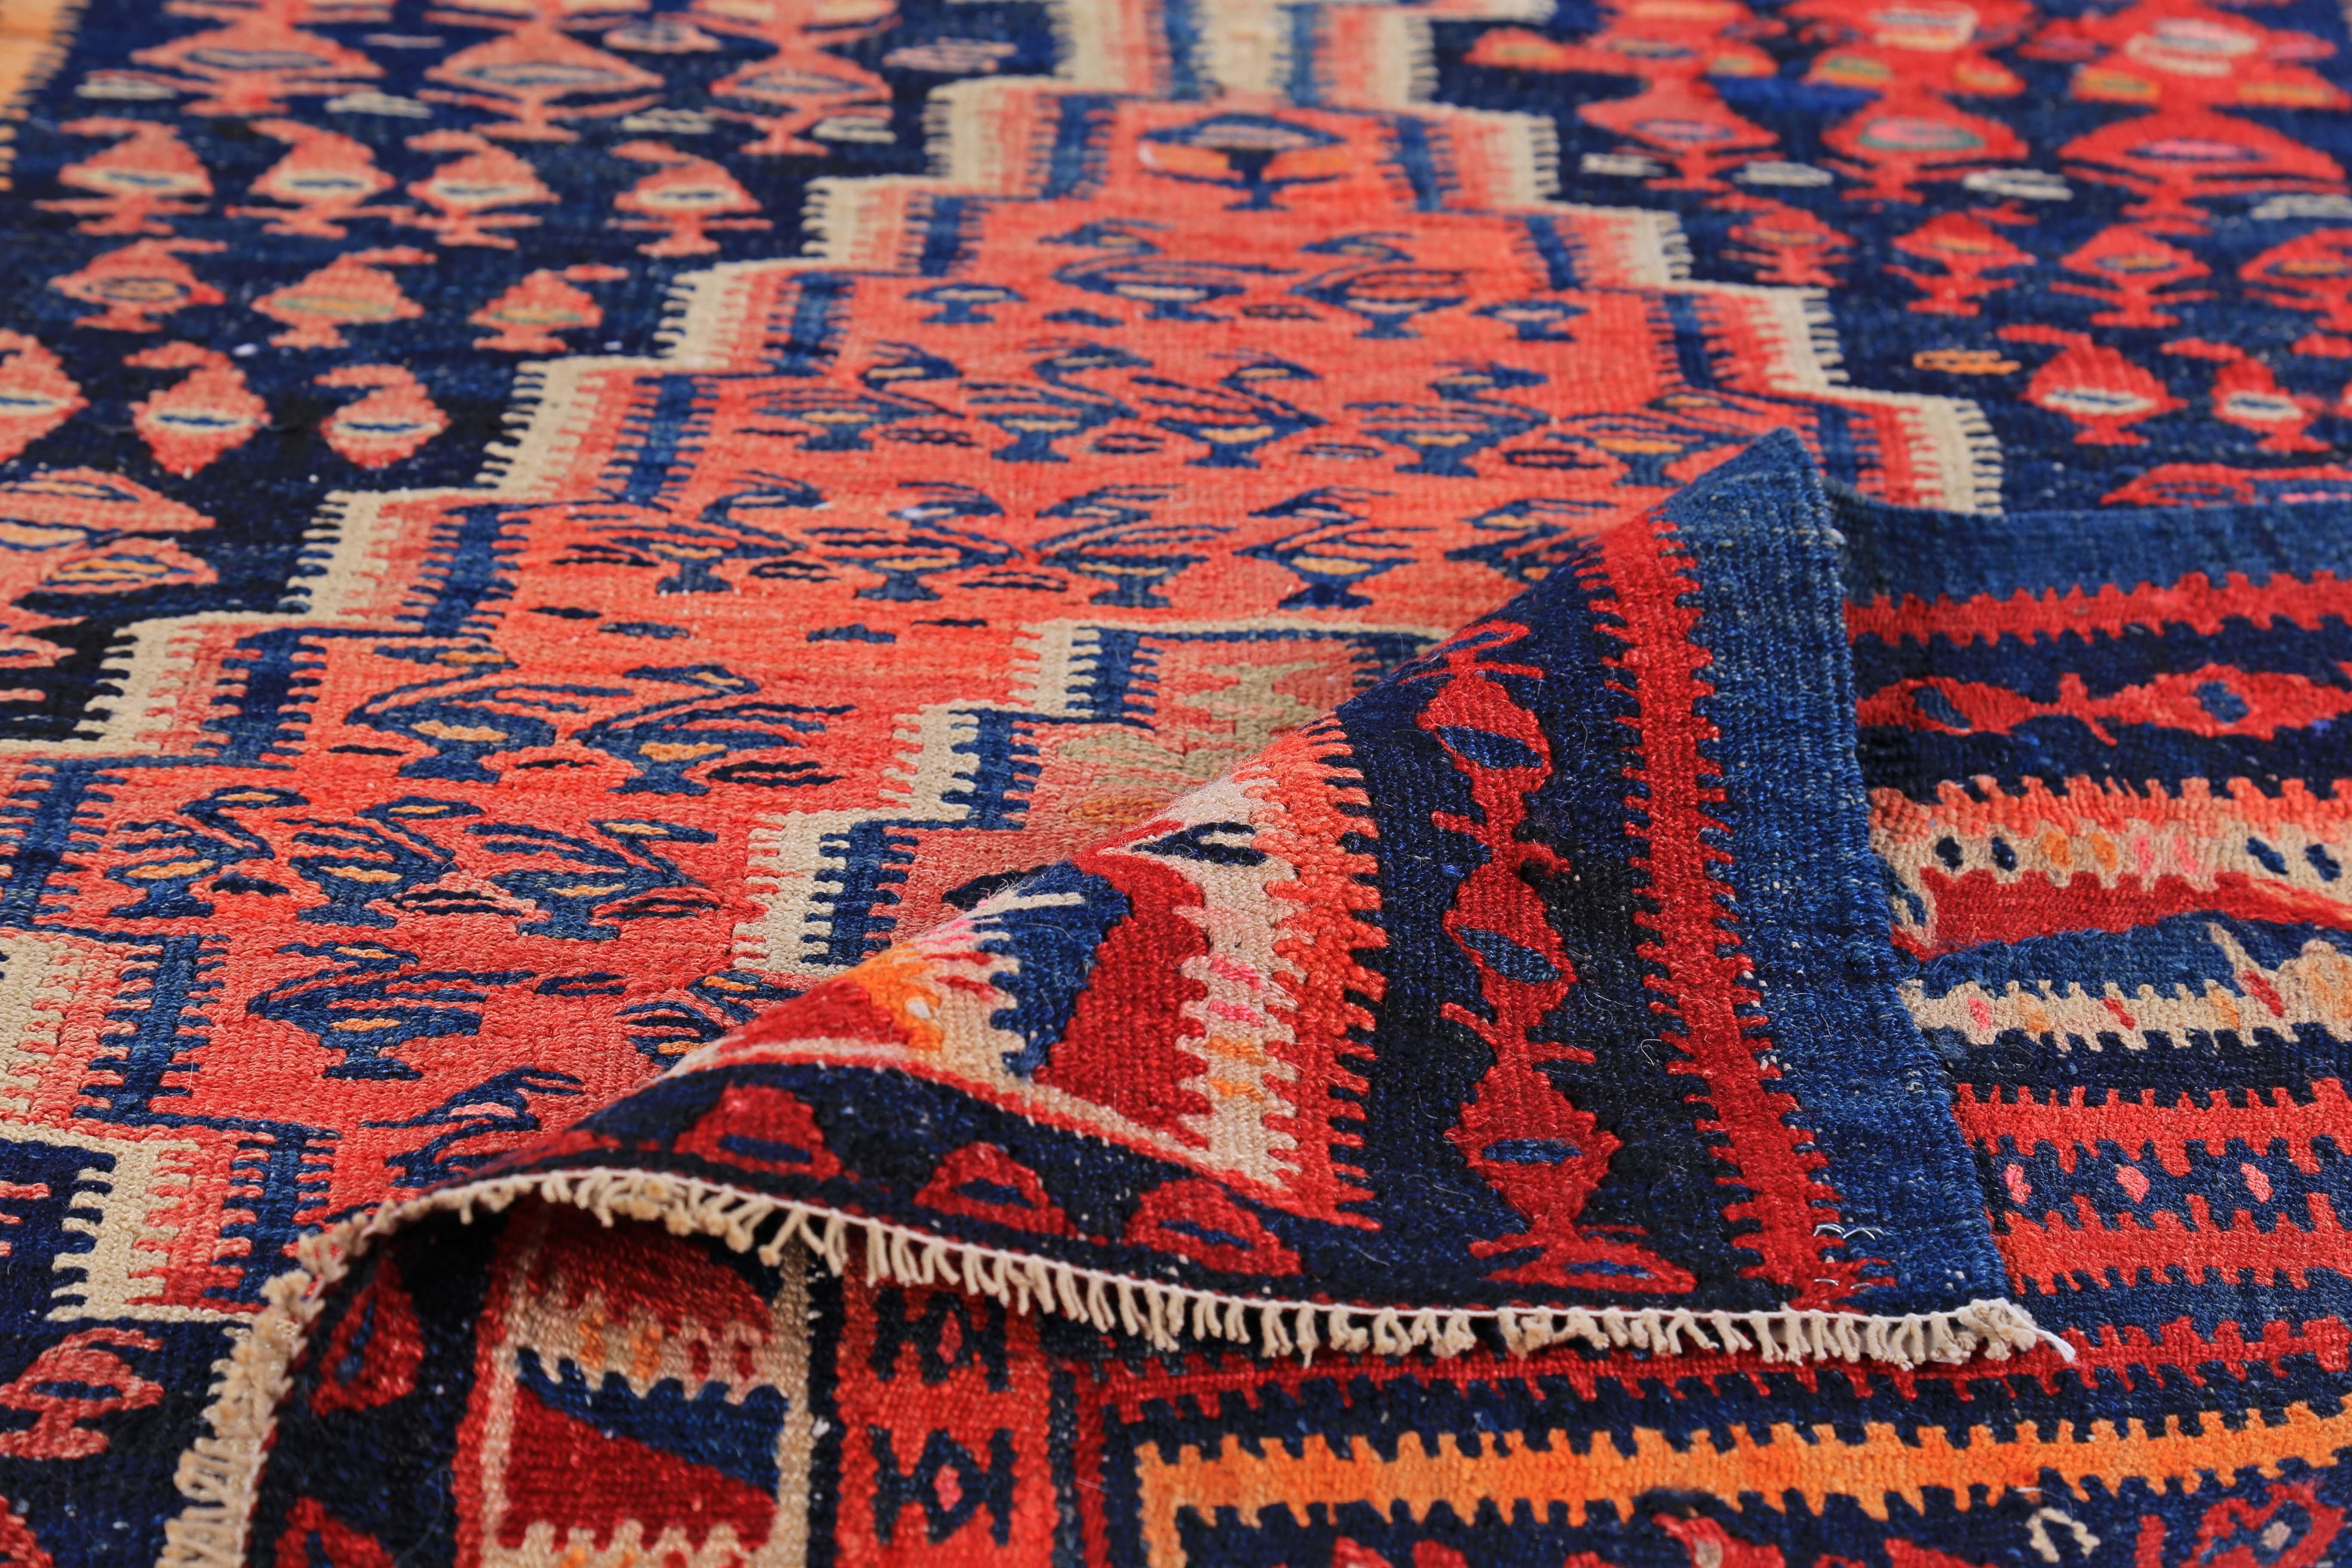 Hand-Woven Modern Turkish Kilim Rug with Red, Blue and Orange Tribal Stripes For Sale